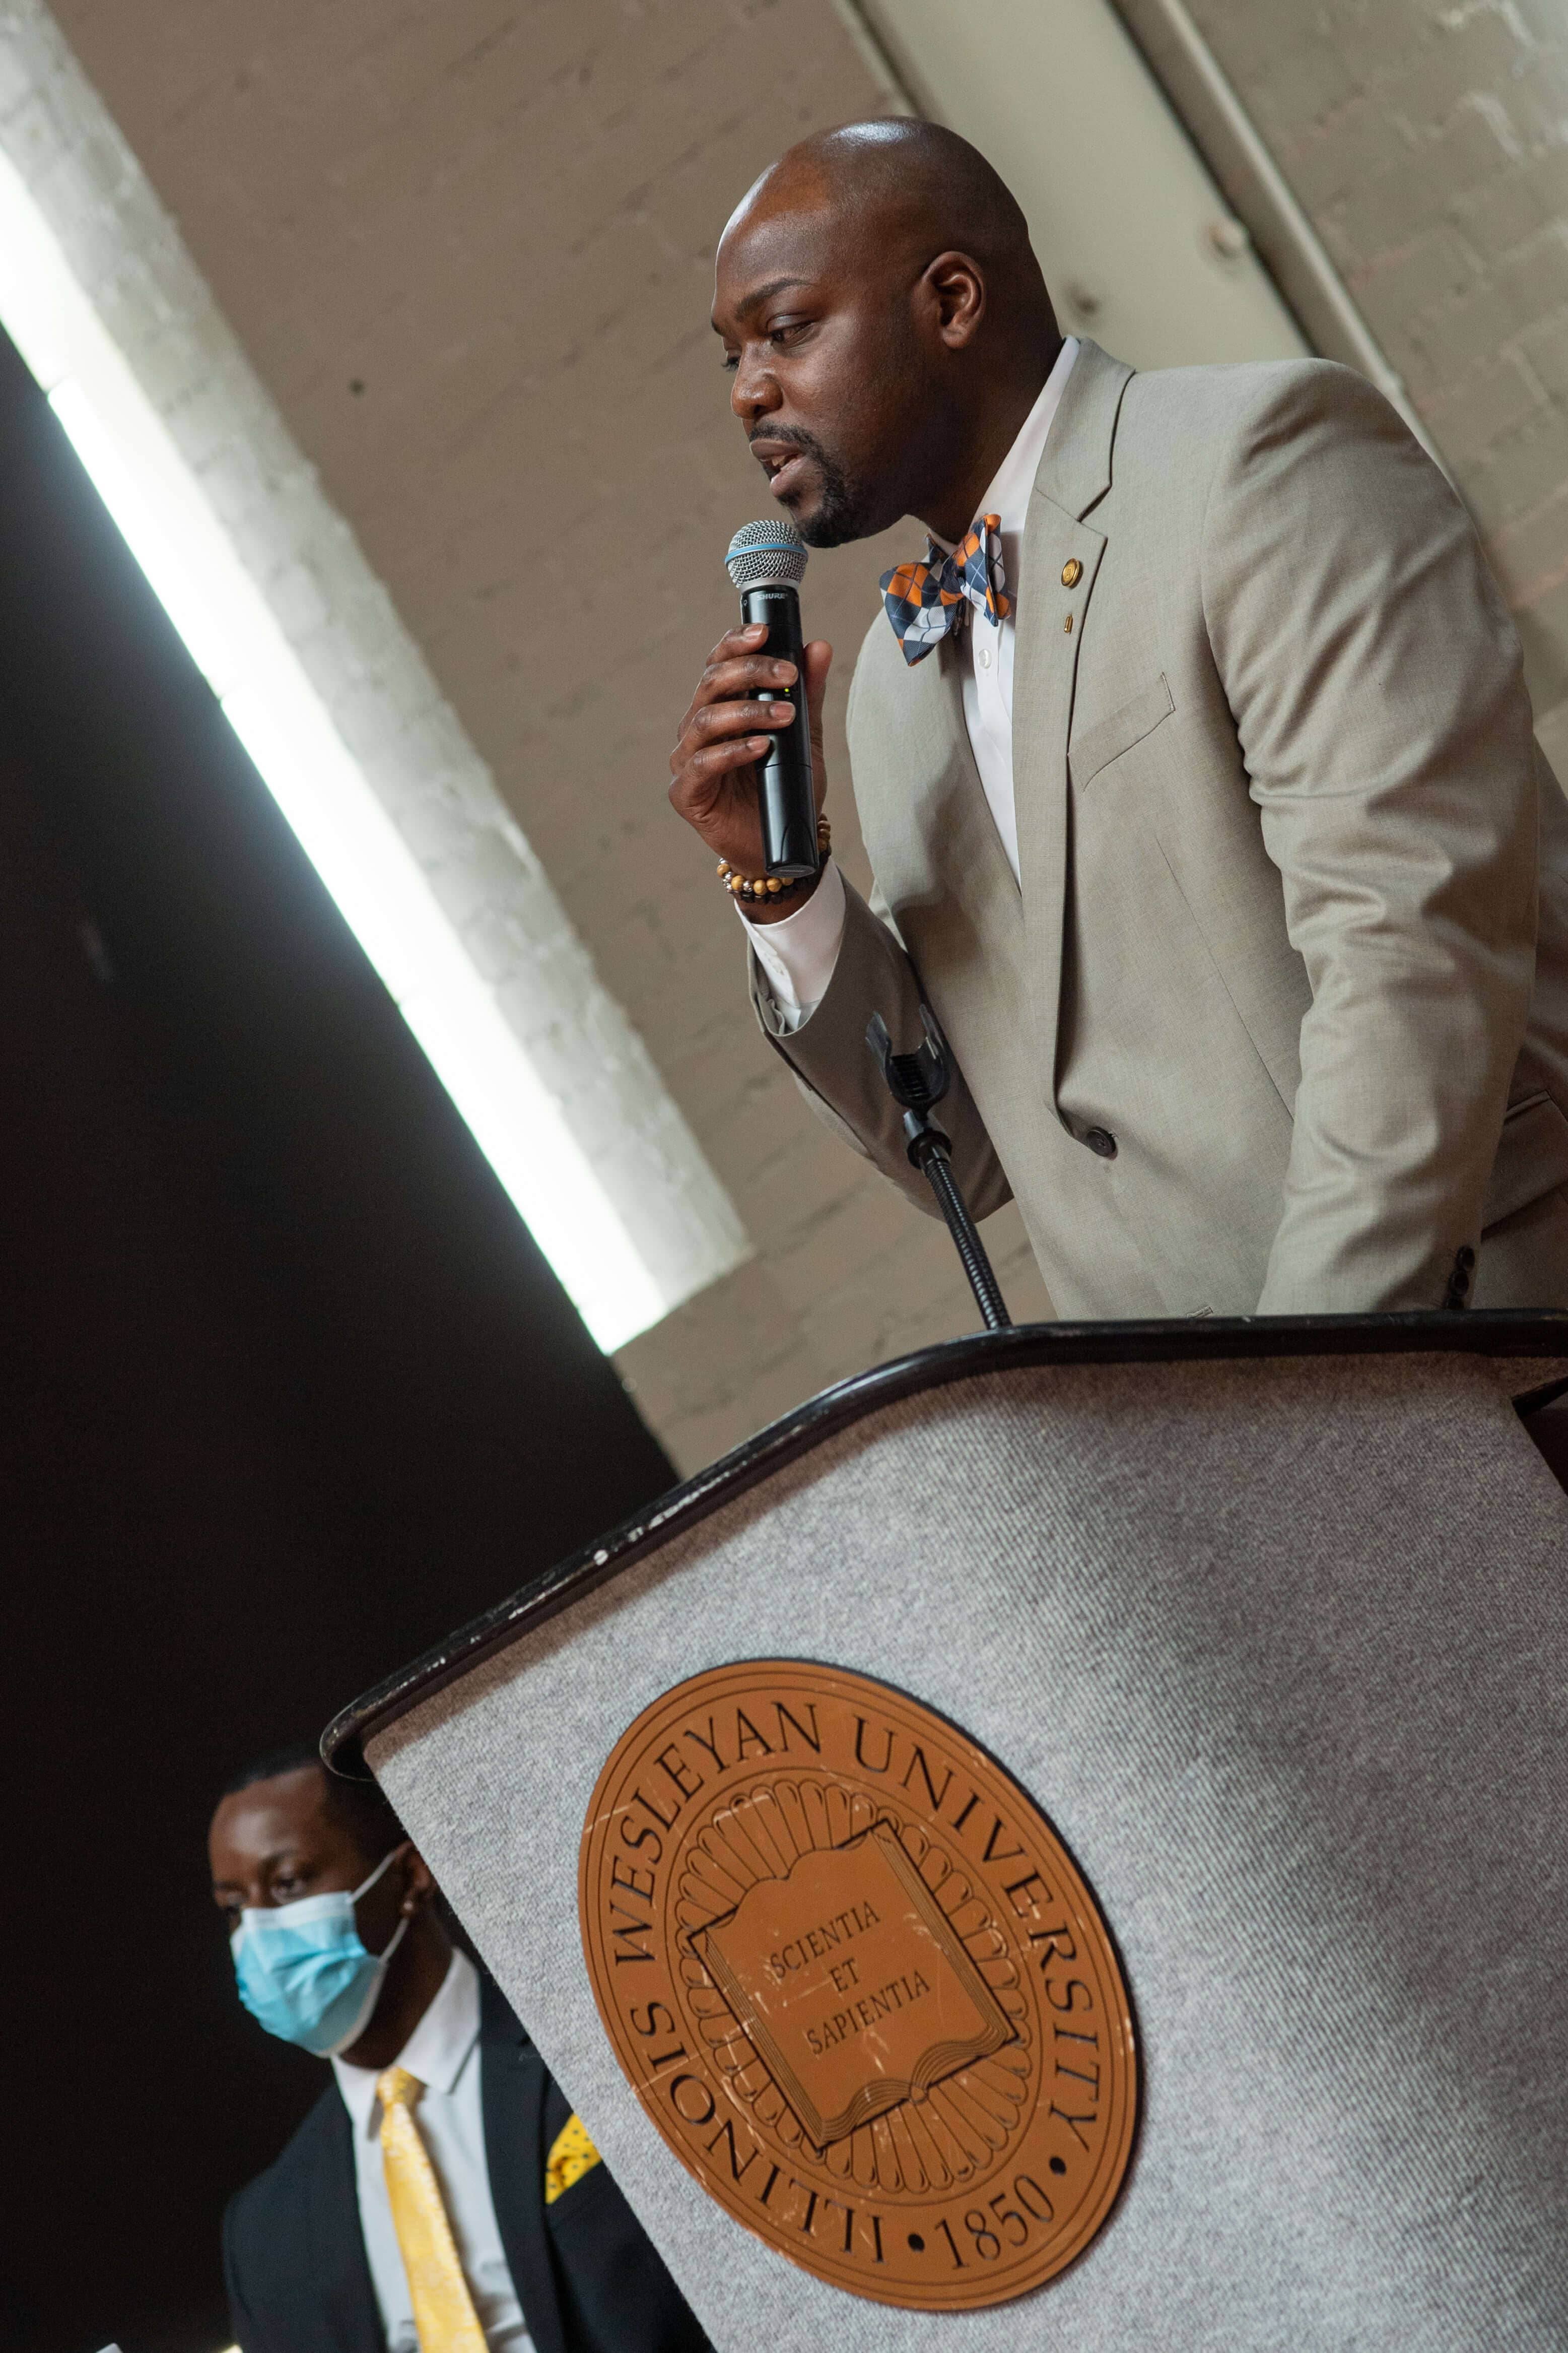 Prince Roberts speaking at the event